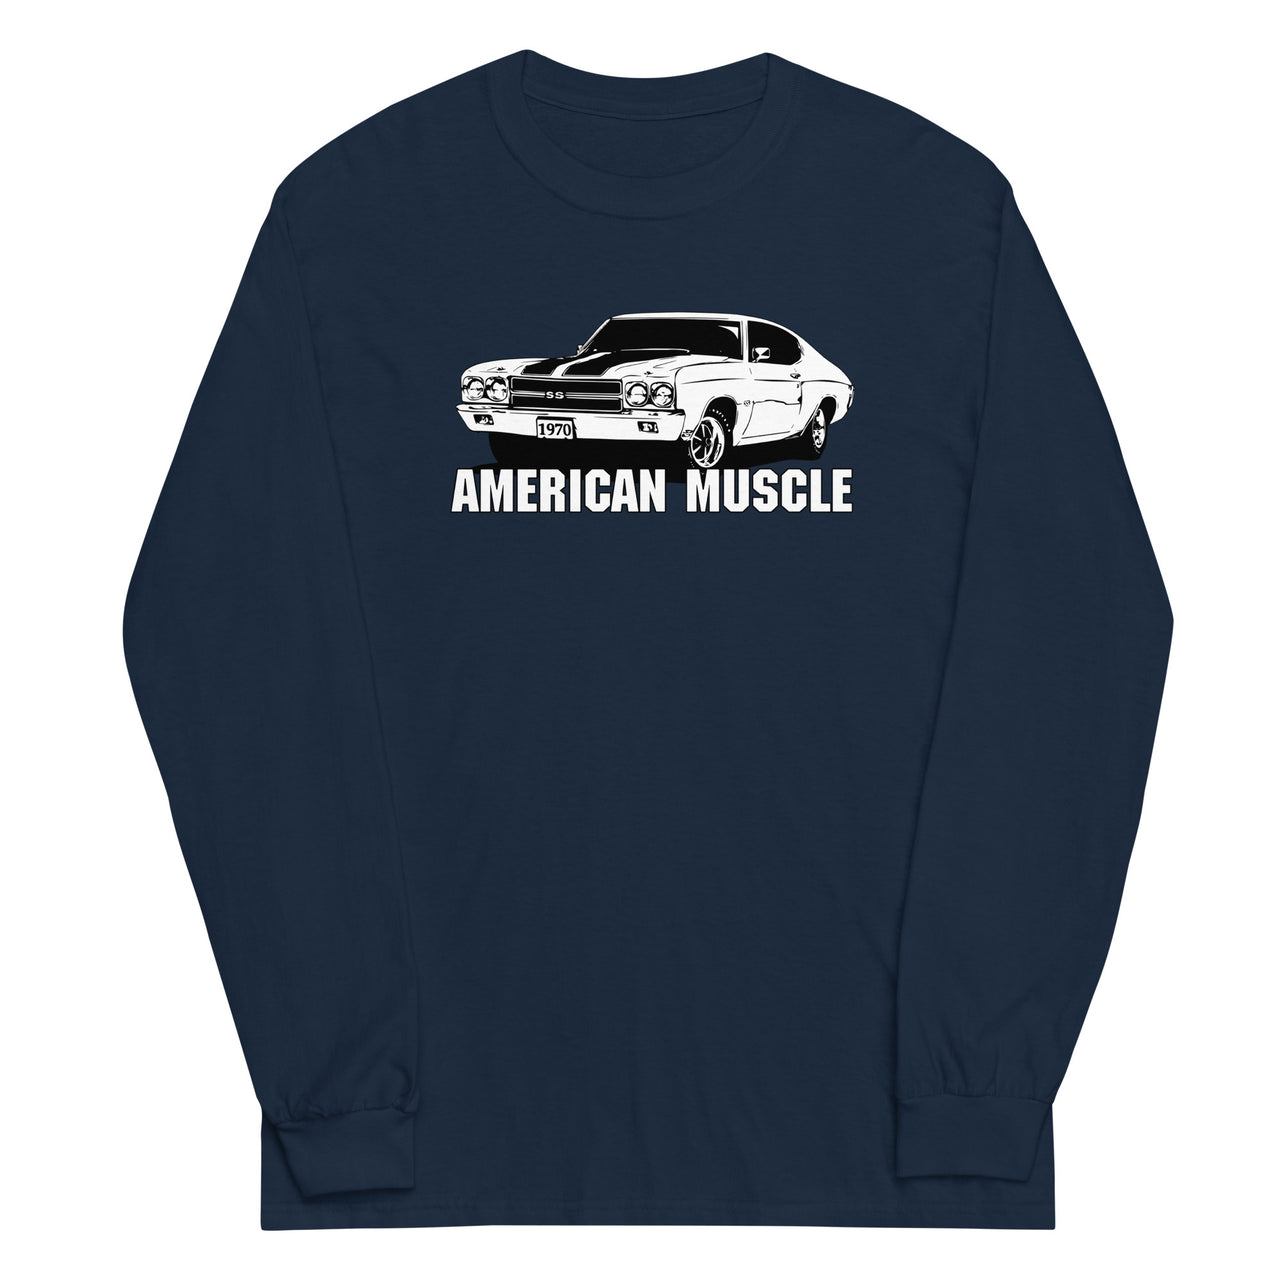 1970 Chevelle Car Long Sleeve T-Shirt in navy